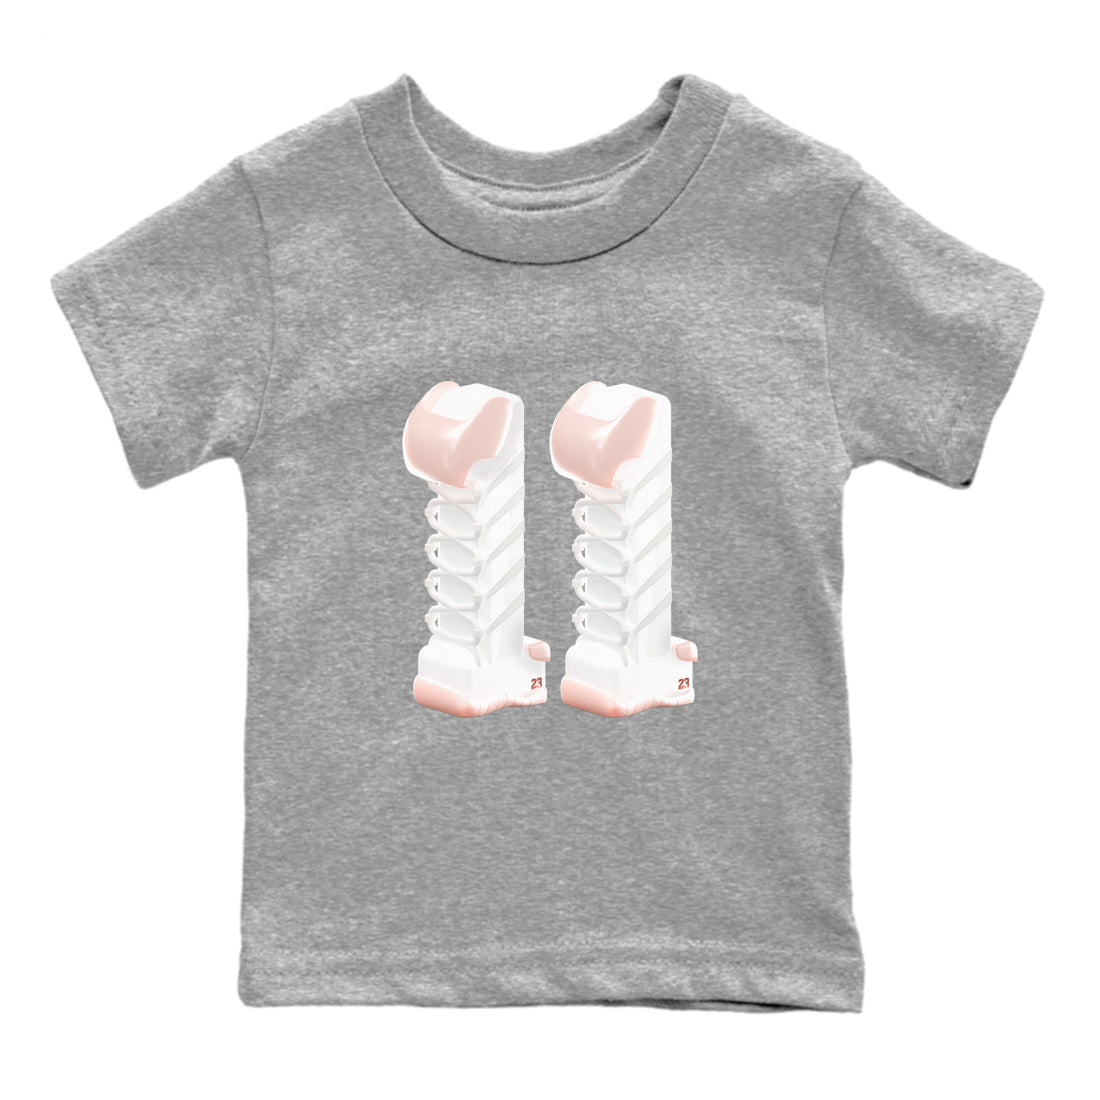 11s Legend Pink shirts to match jordans 3D Number 11 sneaker match tees Air Jordan 11 Legend Pink SNRT Sneaker Tees streetwear brand Baby and Youth Heather Grey 2 cotton tee